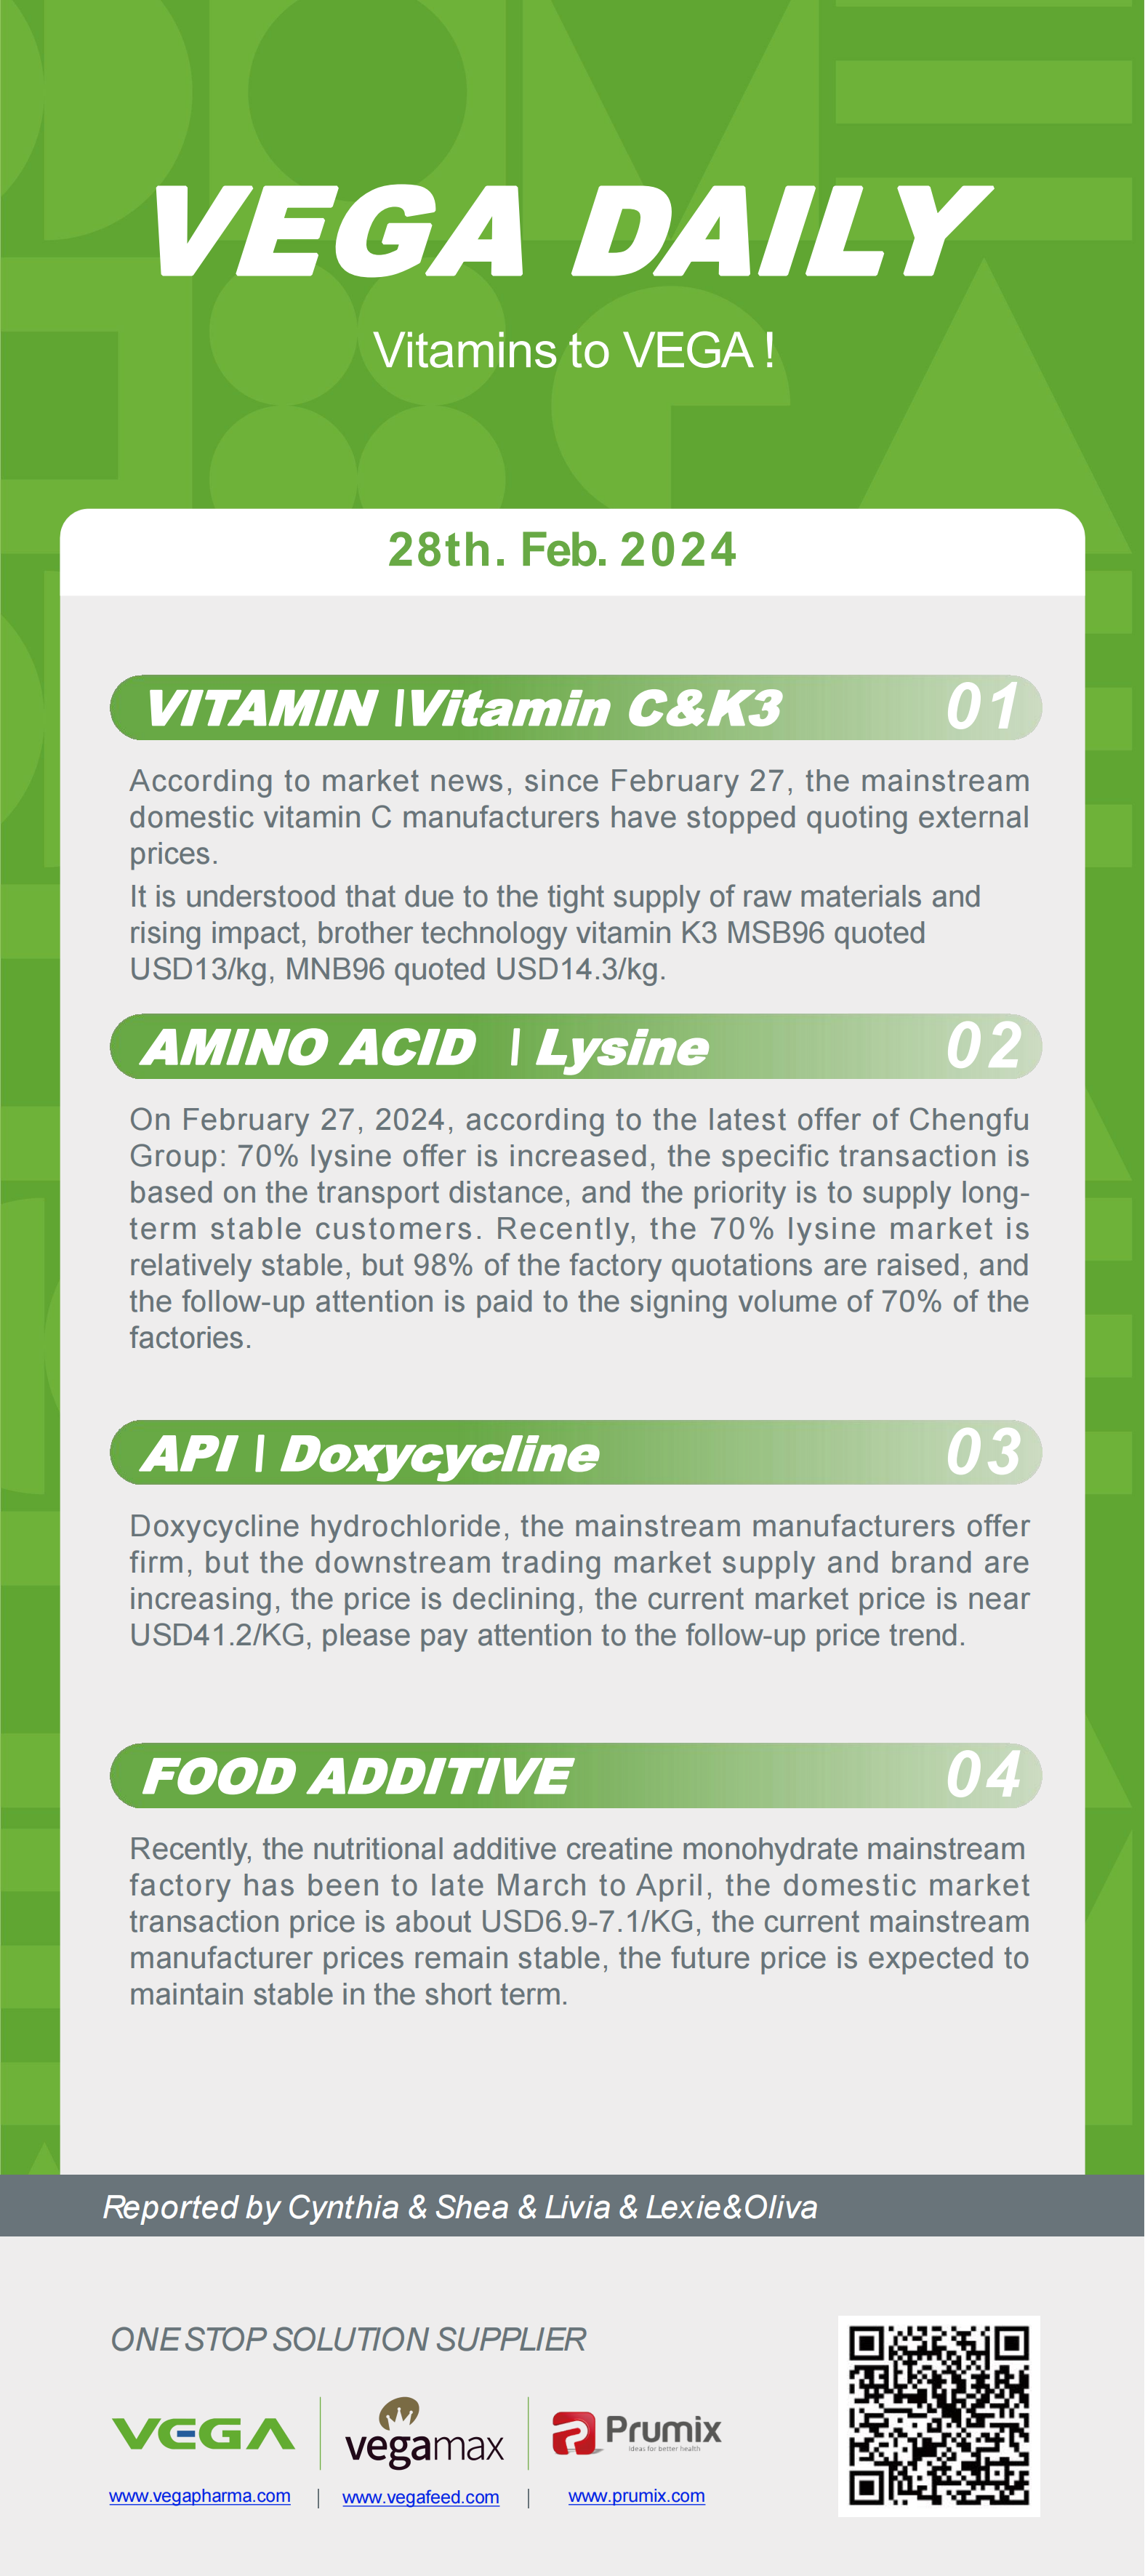 Vega Daily Dated on Fab 28th 2024 Vitamin Amino Acid APl Food Additives.png